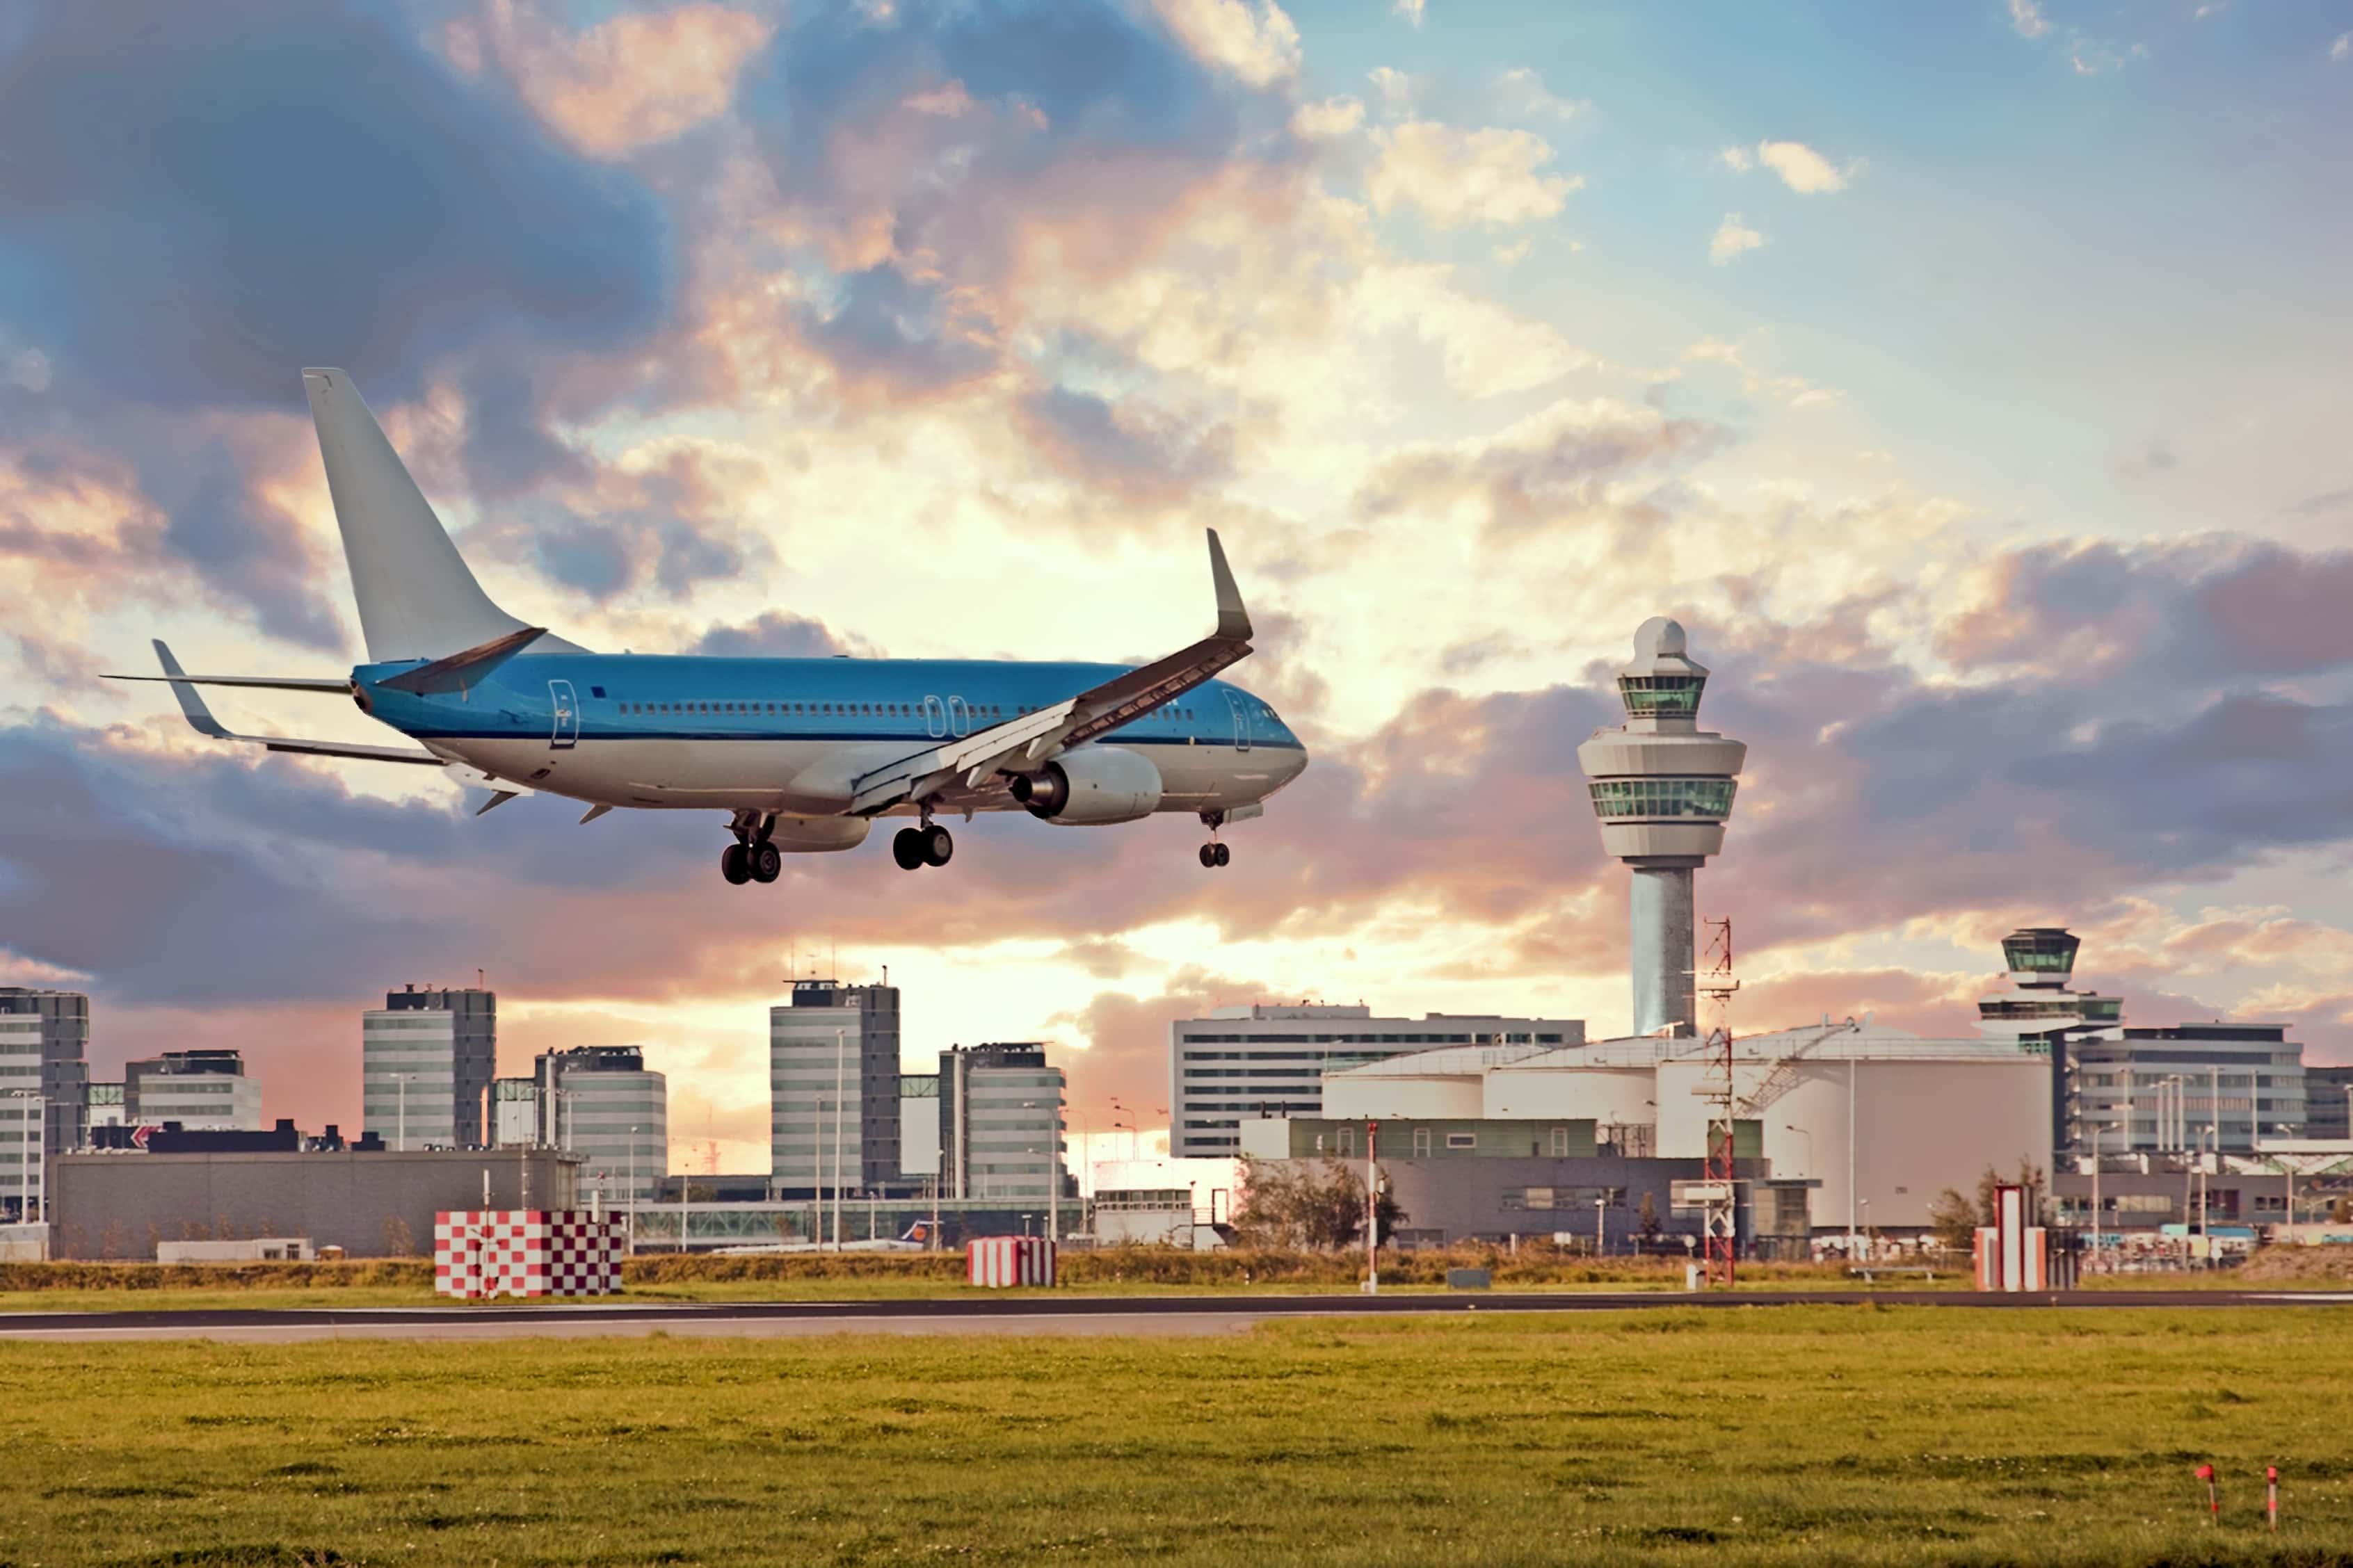 Airplane landing on Schiphol airport in Amsterdam, Netherlands.